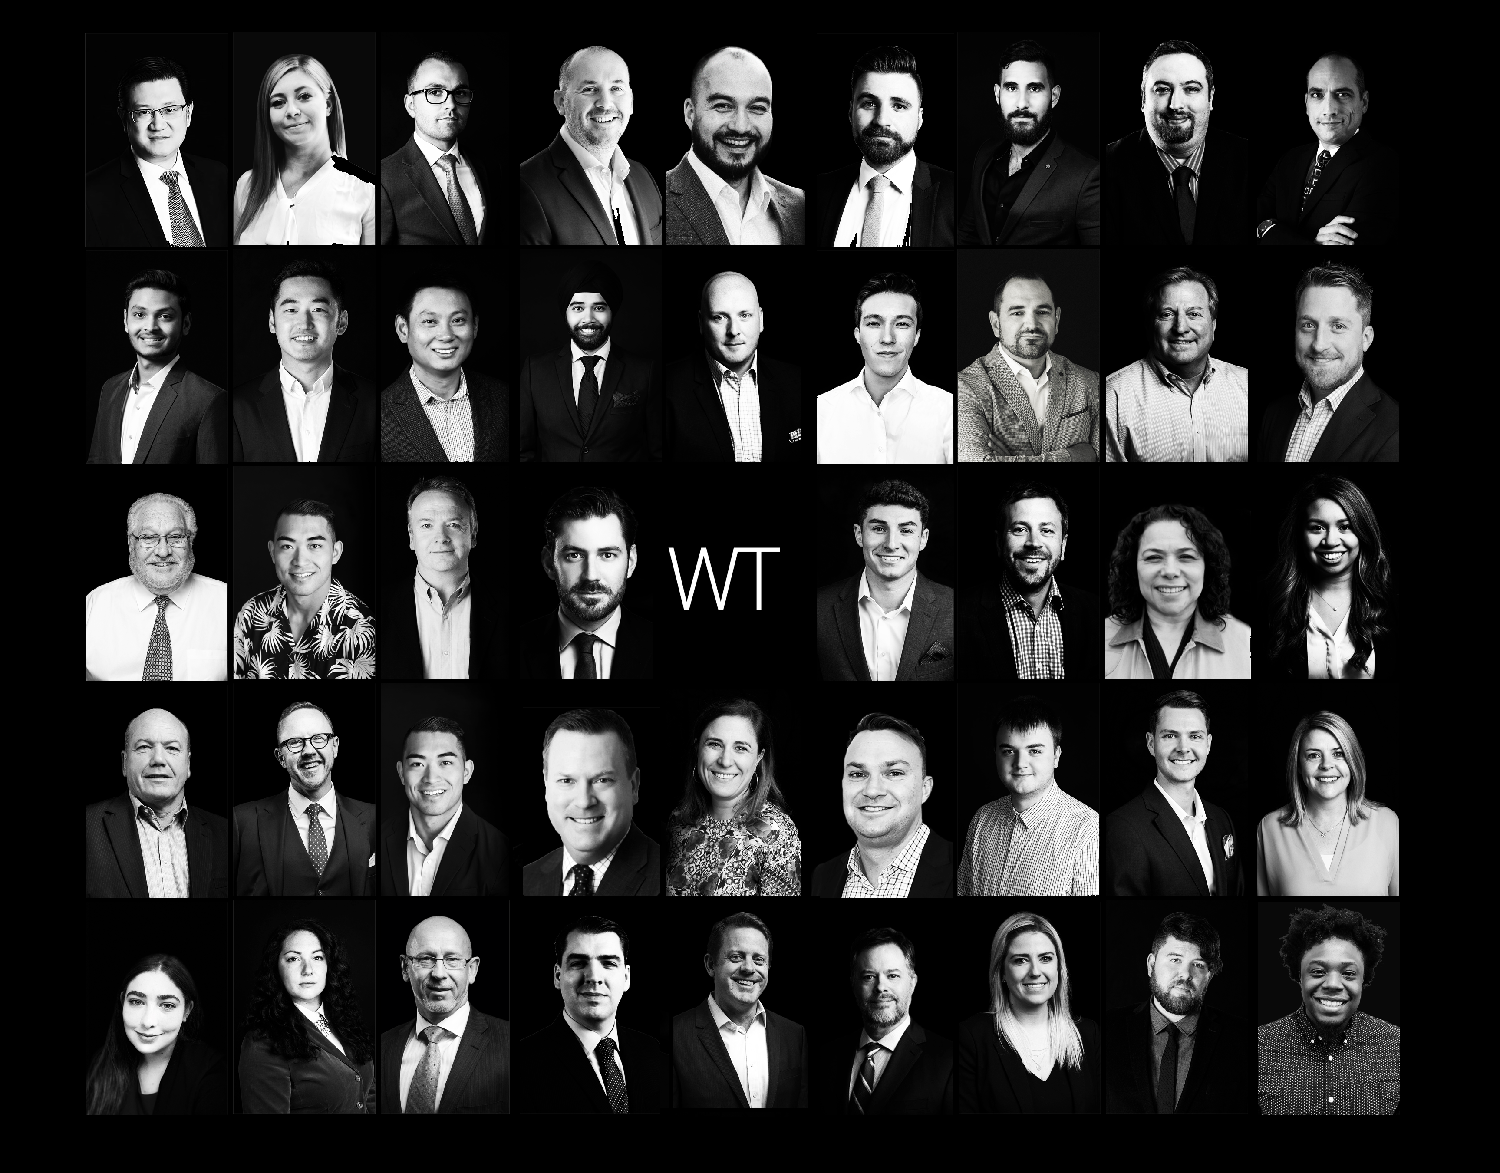 One Team | WT celebrates great talent and diversity through its incredible team of professional management consultants and construction advisors